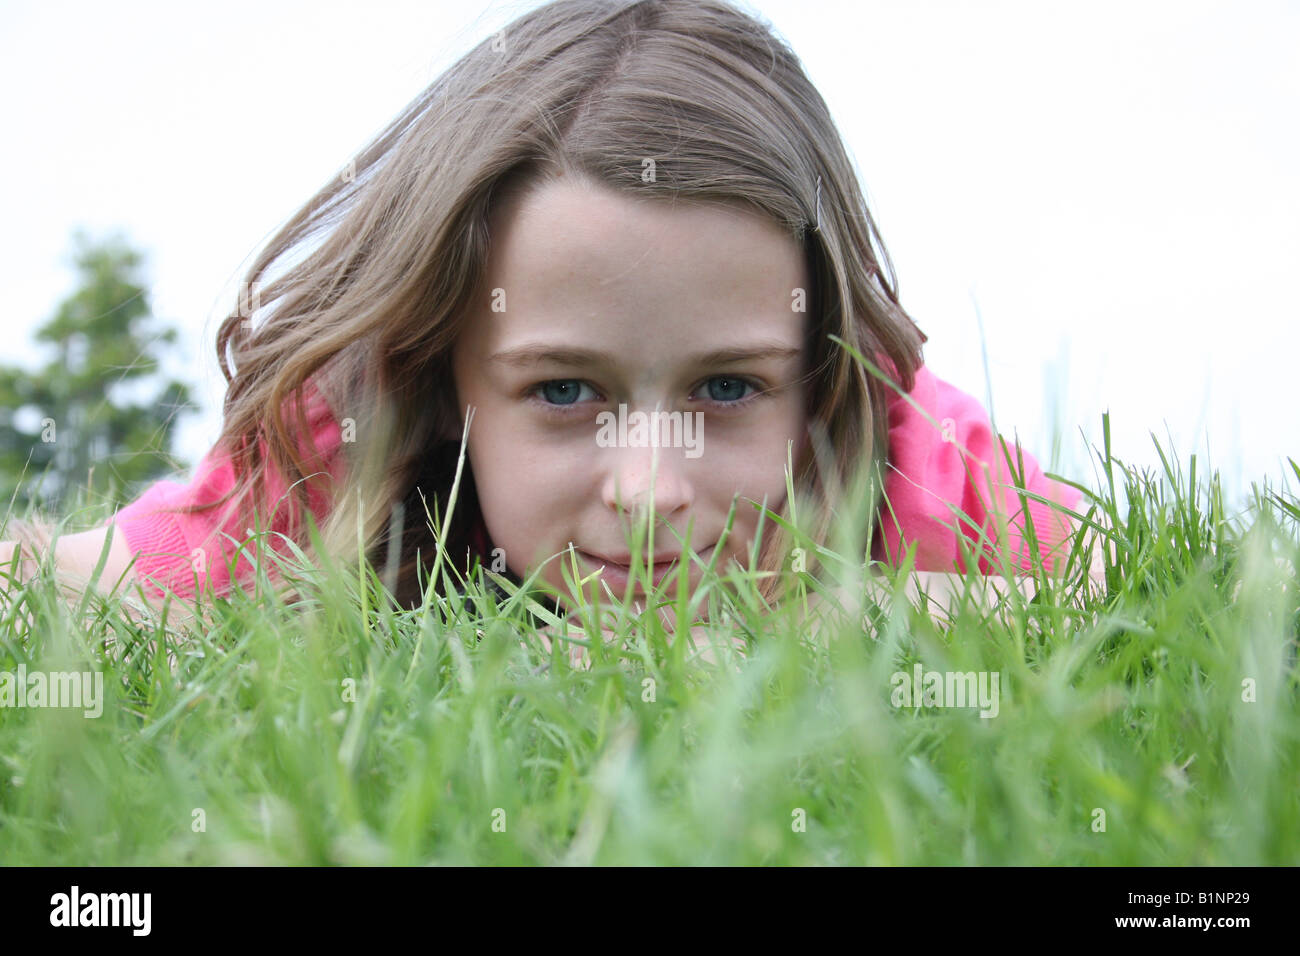 A portrait of a thirteen year old girl in rural England. Stock Photo